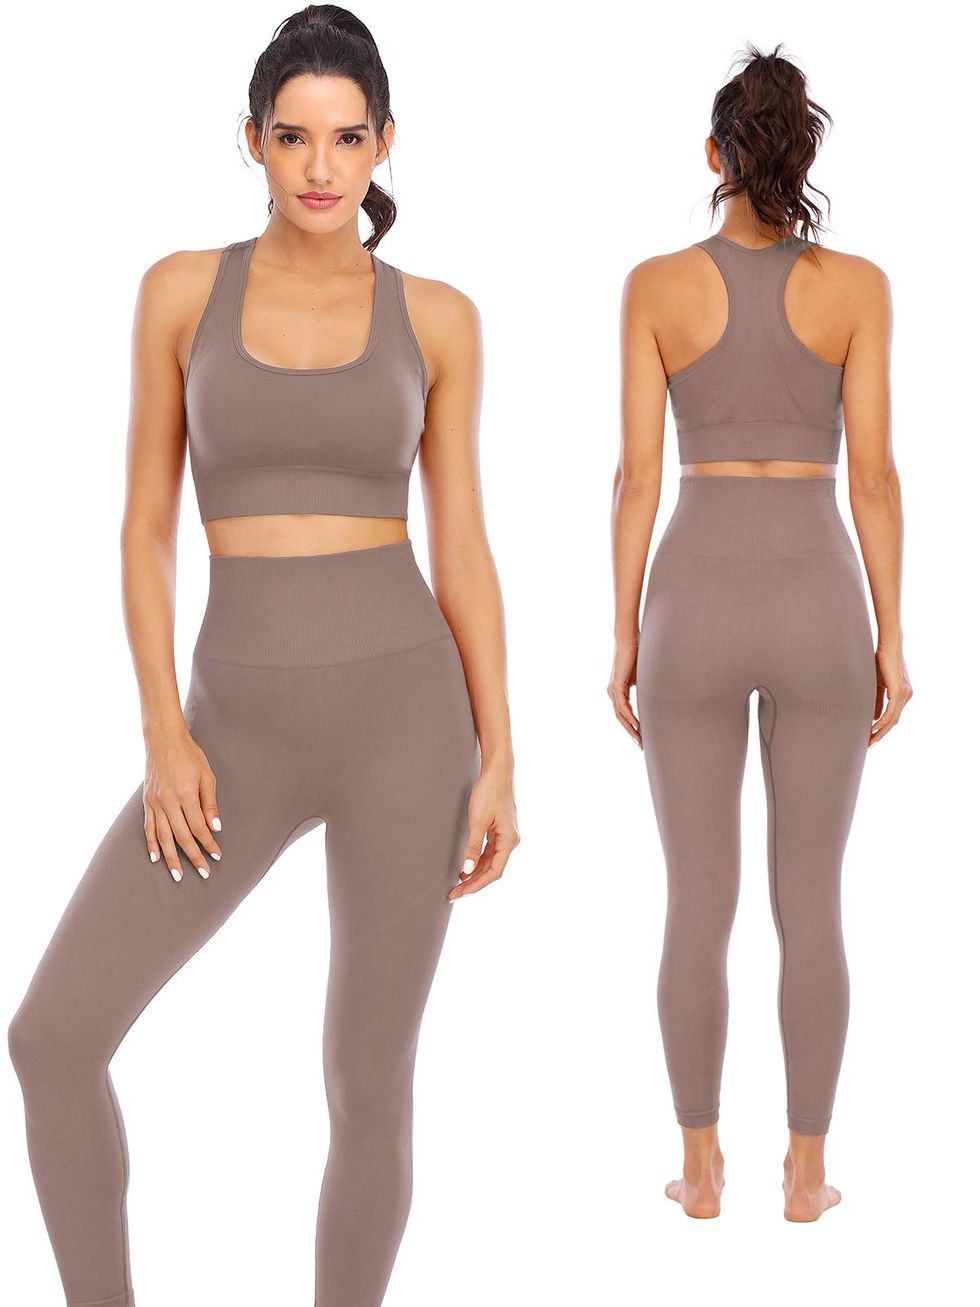 QINSEN Female Seamless GMY Exercise 2 Piece Leggings Sets Ribbed Stretchy  Training Yoga Pants